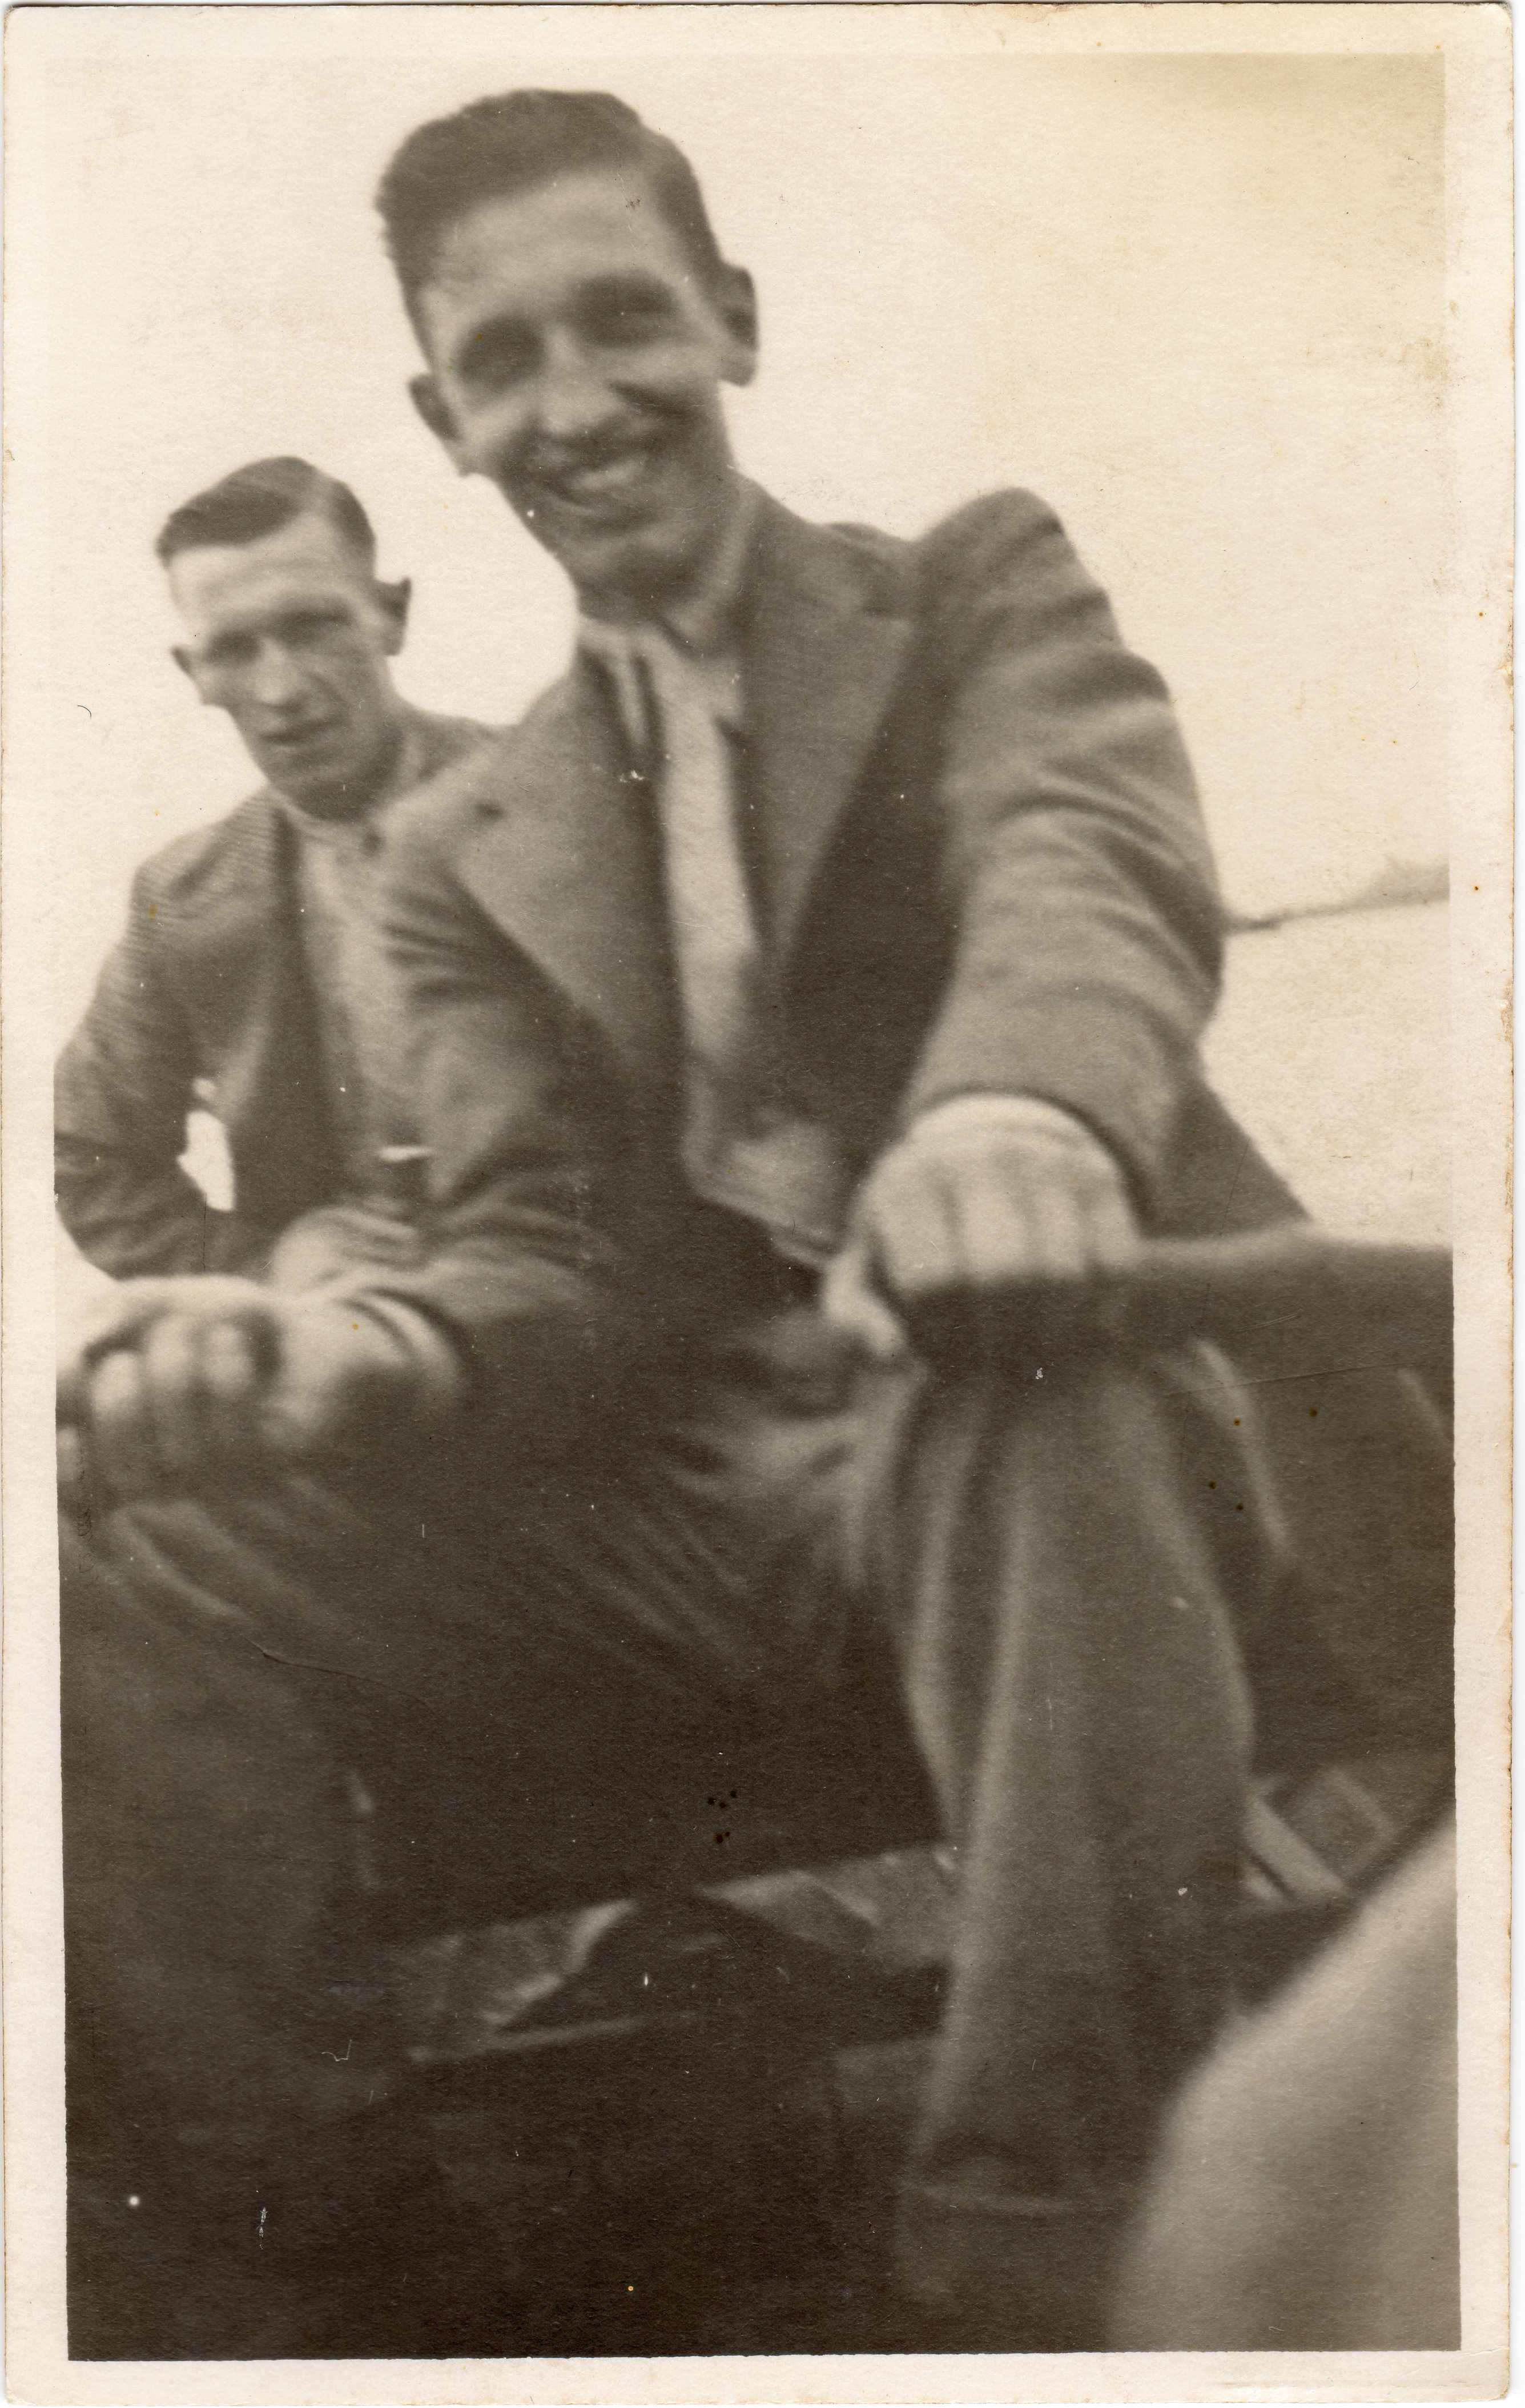  Edgar Reynolds on the right ?  Photograph donated by Pat Milgate  OJR_275